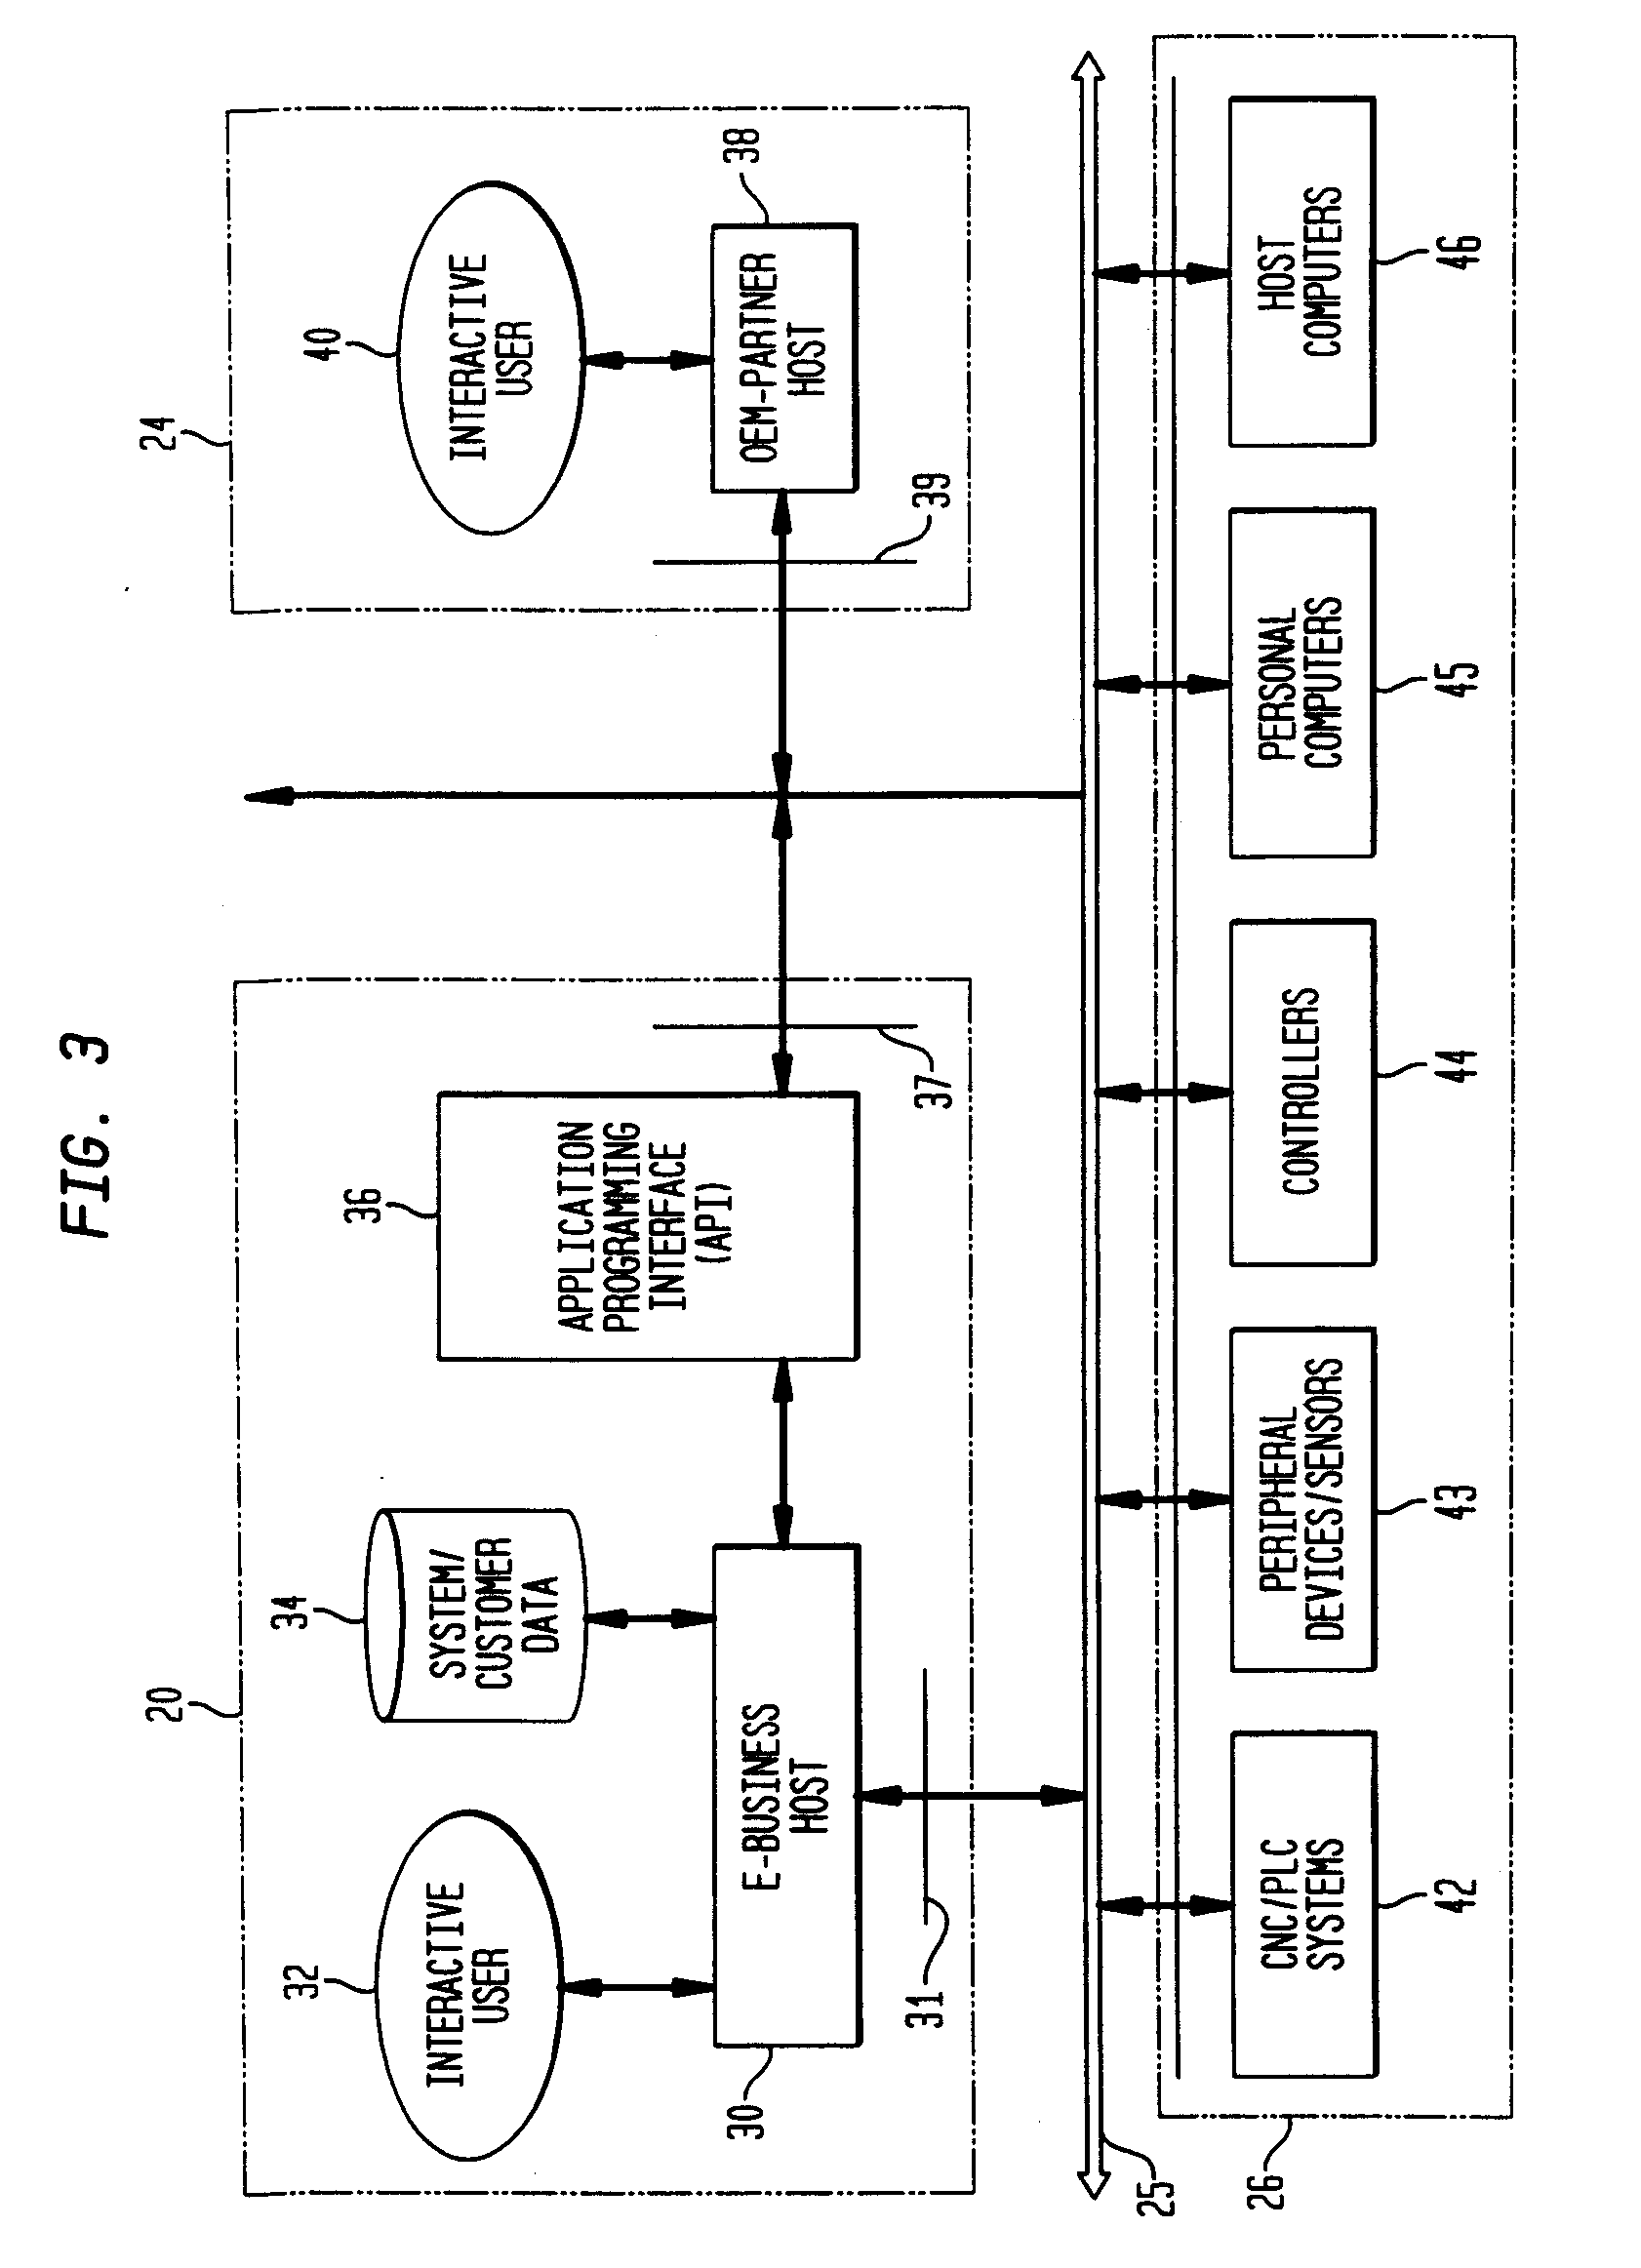 System architecture and method for network-delivered automation-related content